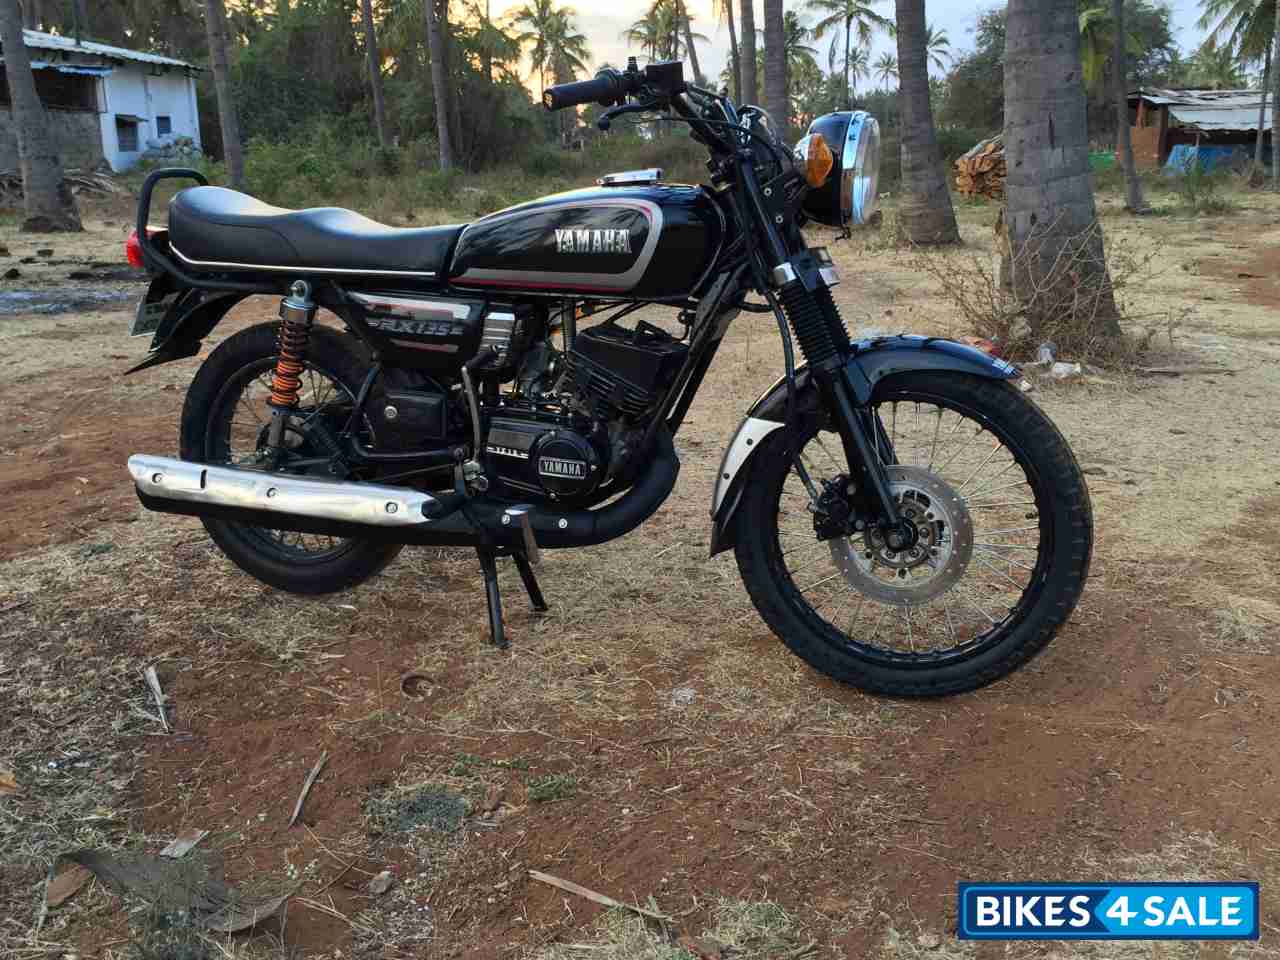 Used 2000 Model Yamaha Rx 135 For Sale In Tumkur Id 119549